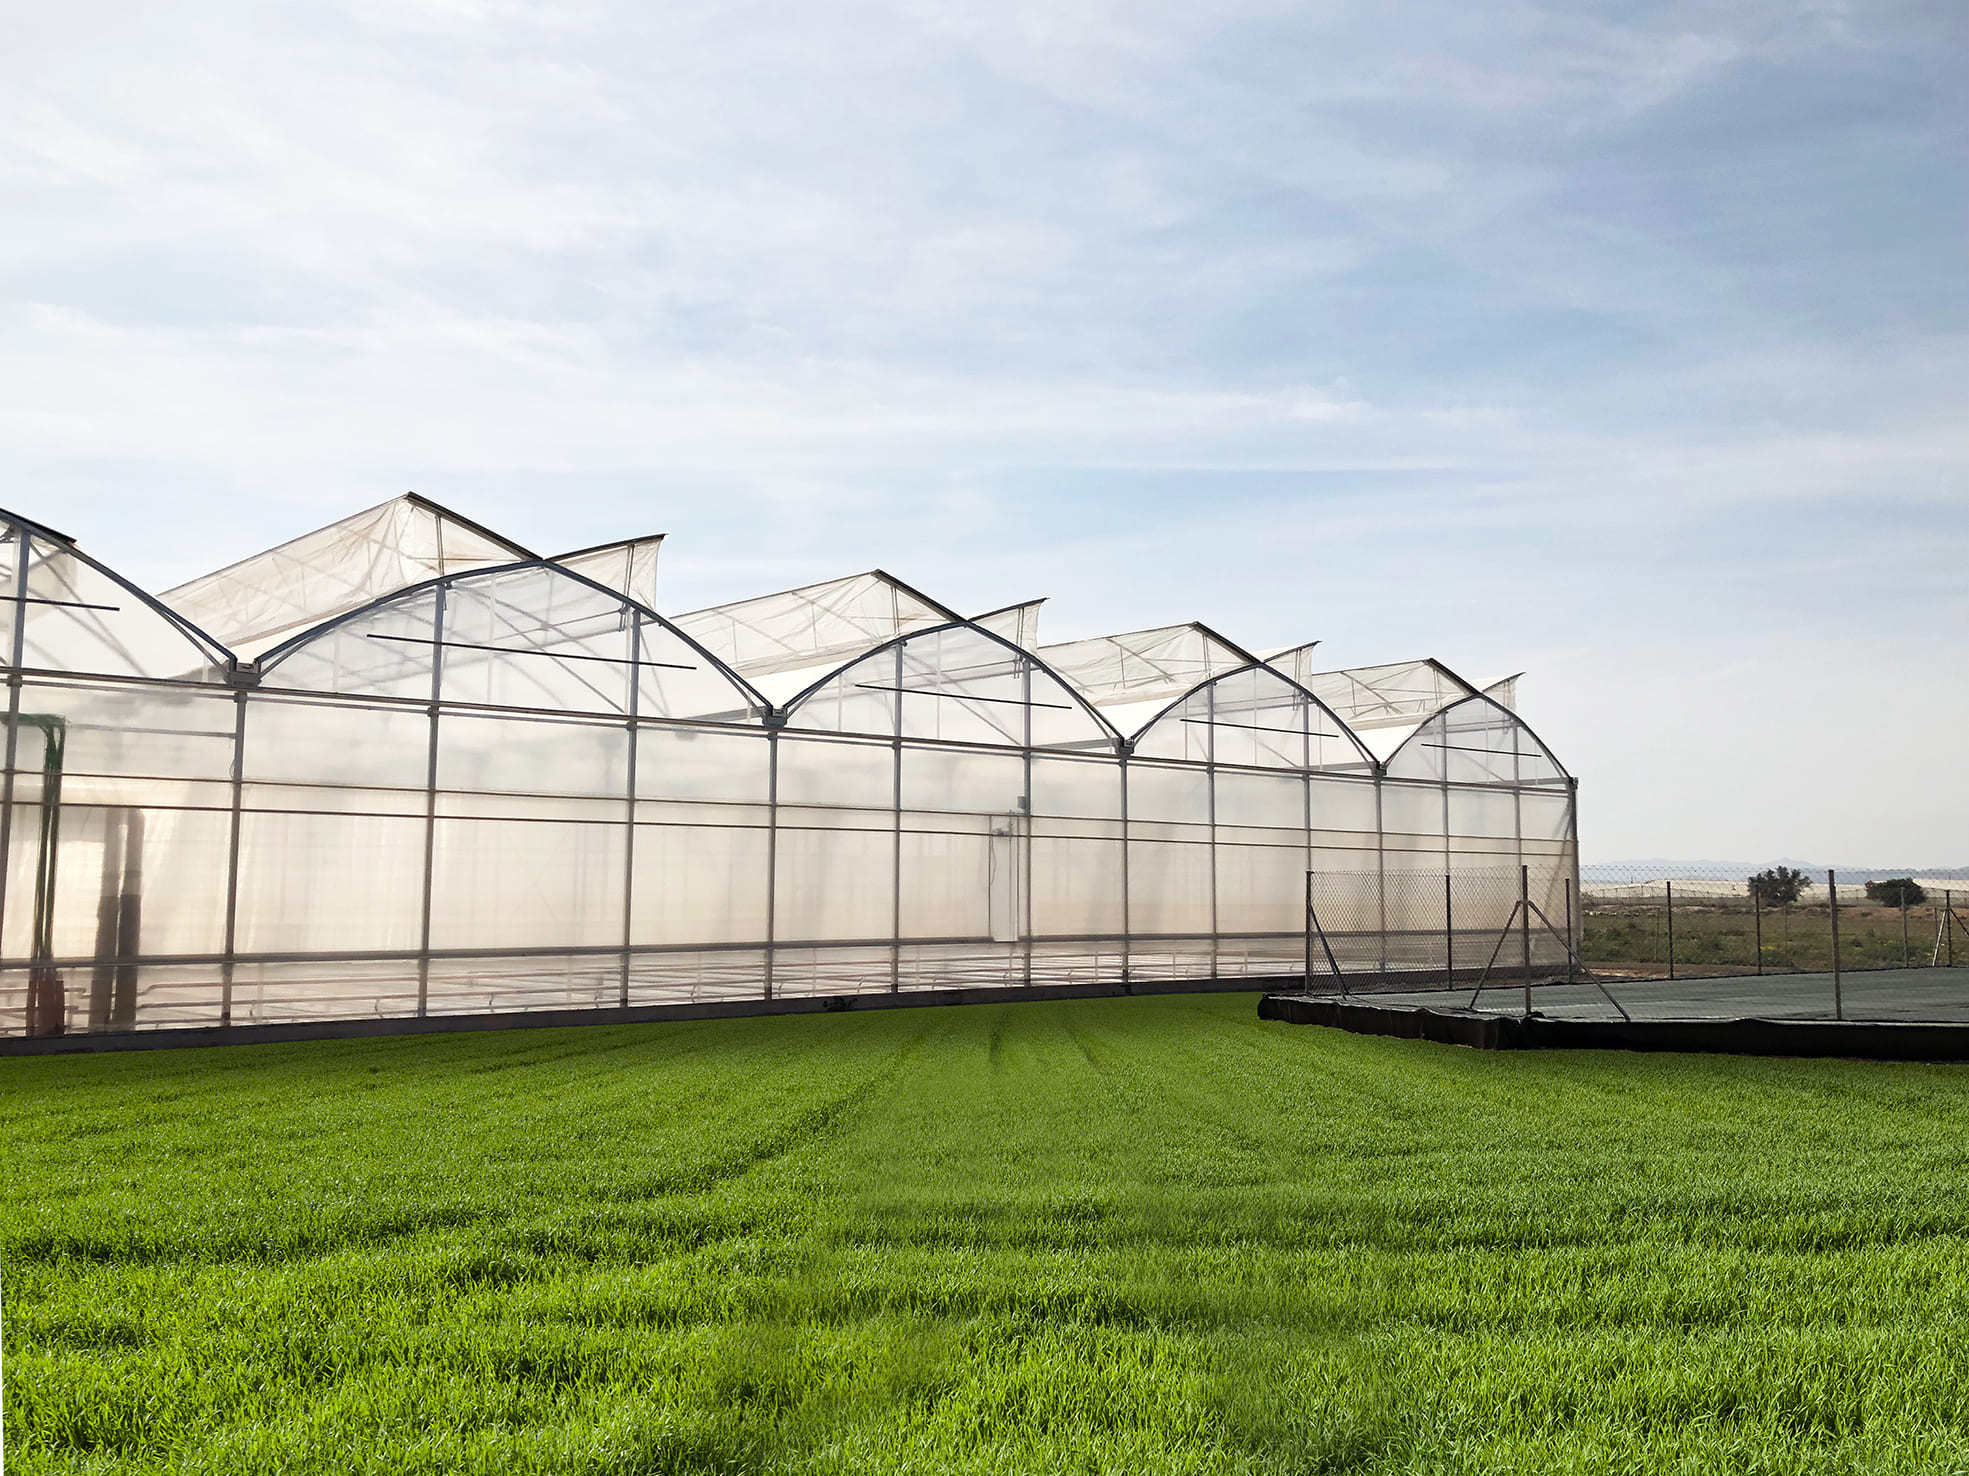 What are the Benefits of Polycarbonate Sheets for Greenhouse Projects?,  Polycarbonate Sheets, polycarbonate sheets for greenhouse, polycarbonate greenhouse sheets, greenhouse polycarbonate sheet, greenhouse sheeting polycarbonate 